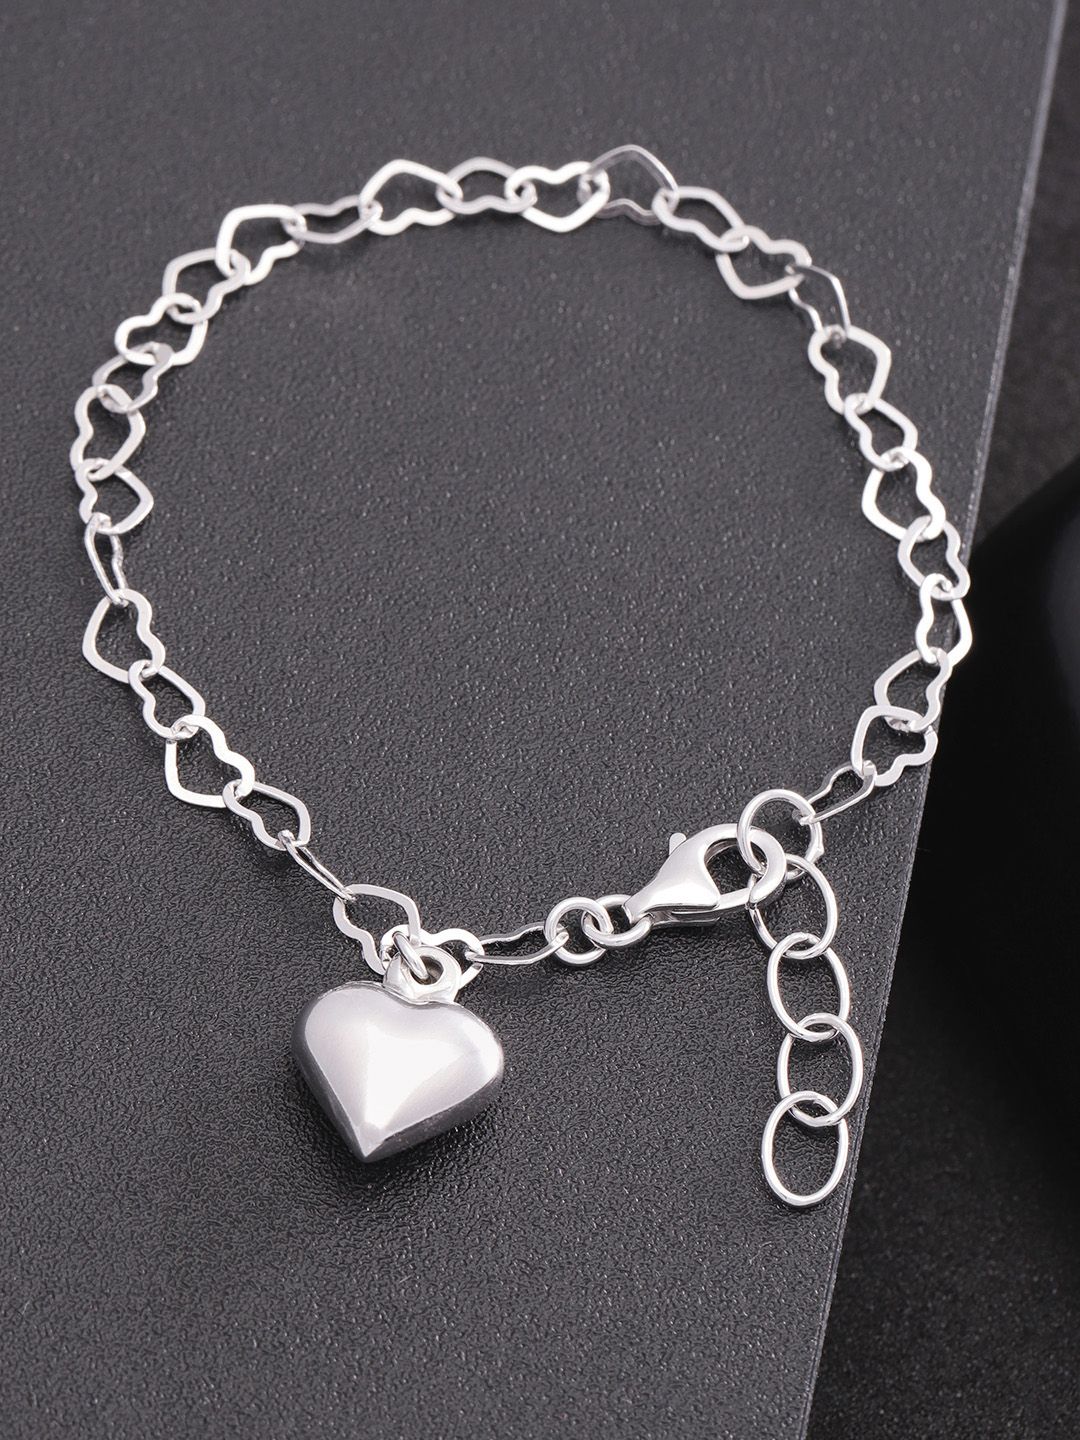 Carlton London Silver-Toned Rhodium-Plated Charm Bracelet Price in India